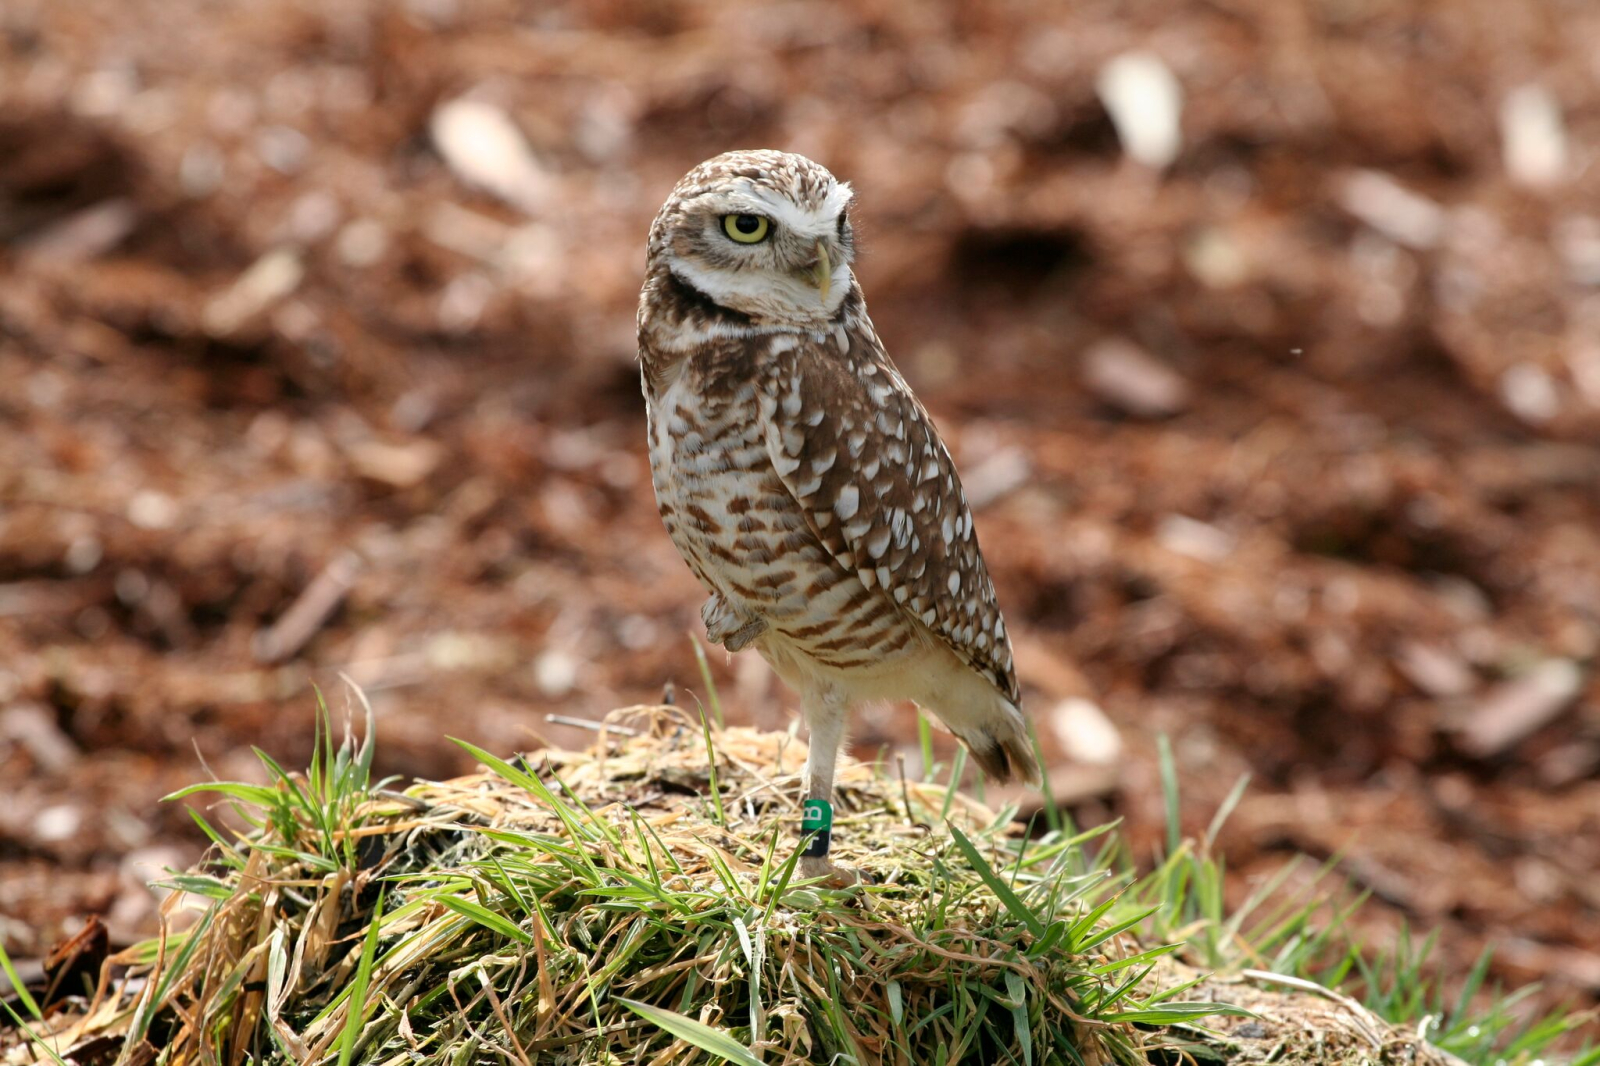 A burrowing owl in B.C. Photo by Burrowing Owl Winery